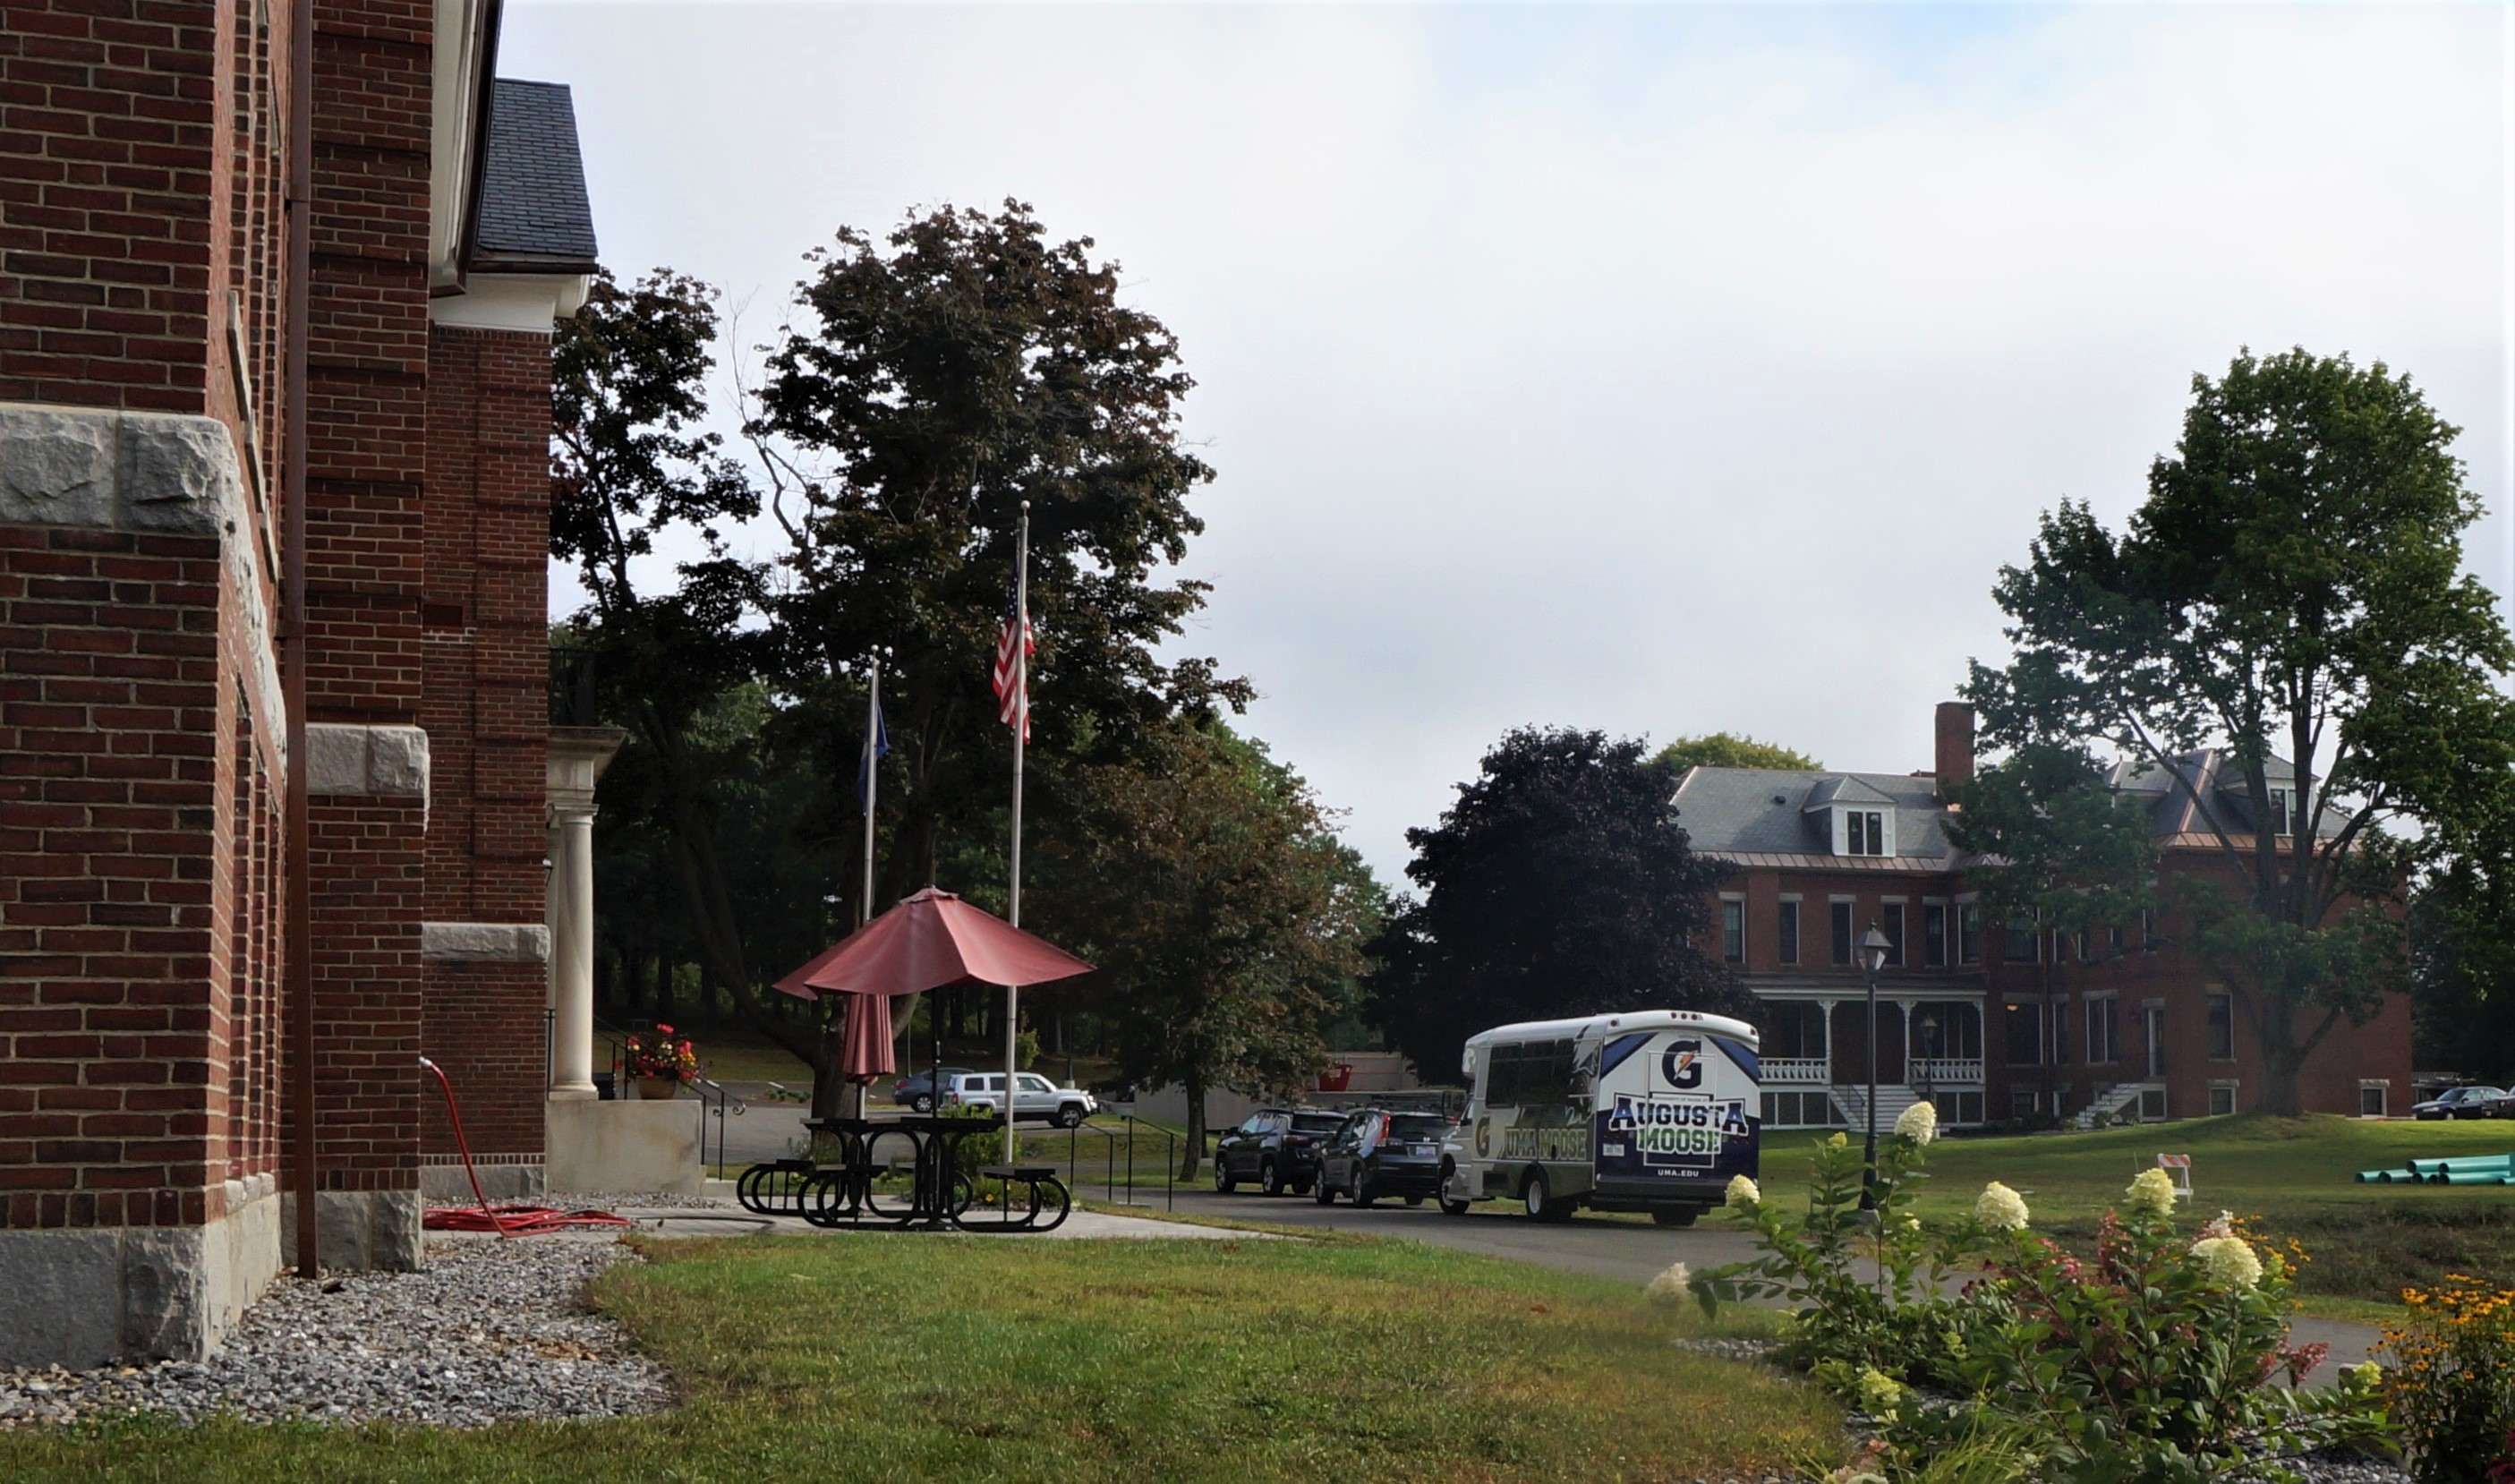 Part of a brick building in the foreground and across a landscaped lawn another three-story brick building in the back and shuttle bus that says Augusta Moose on it